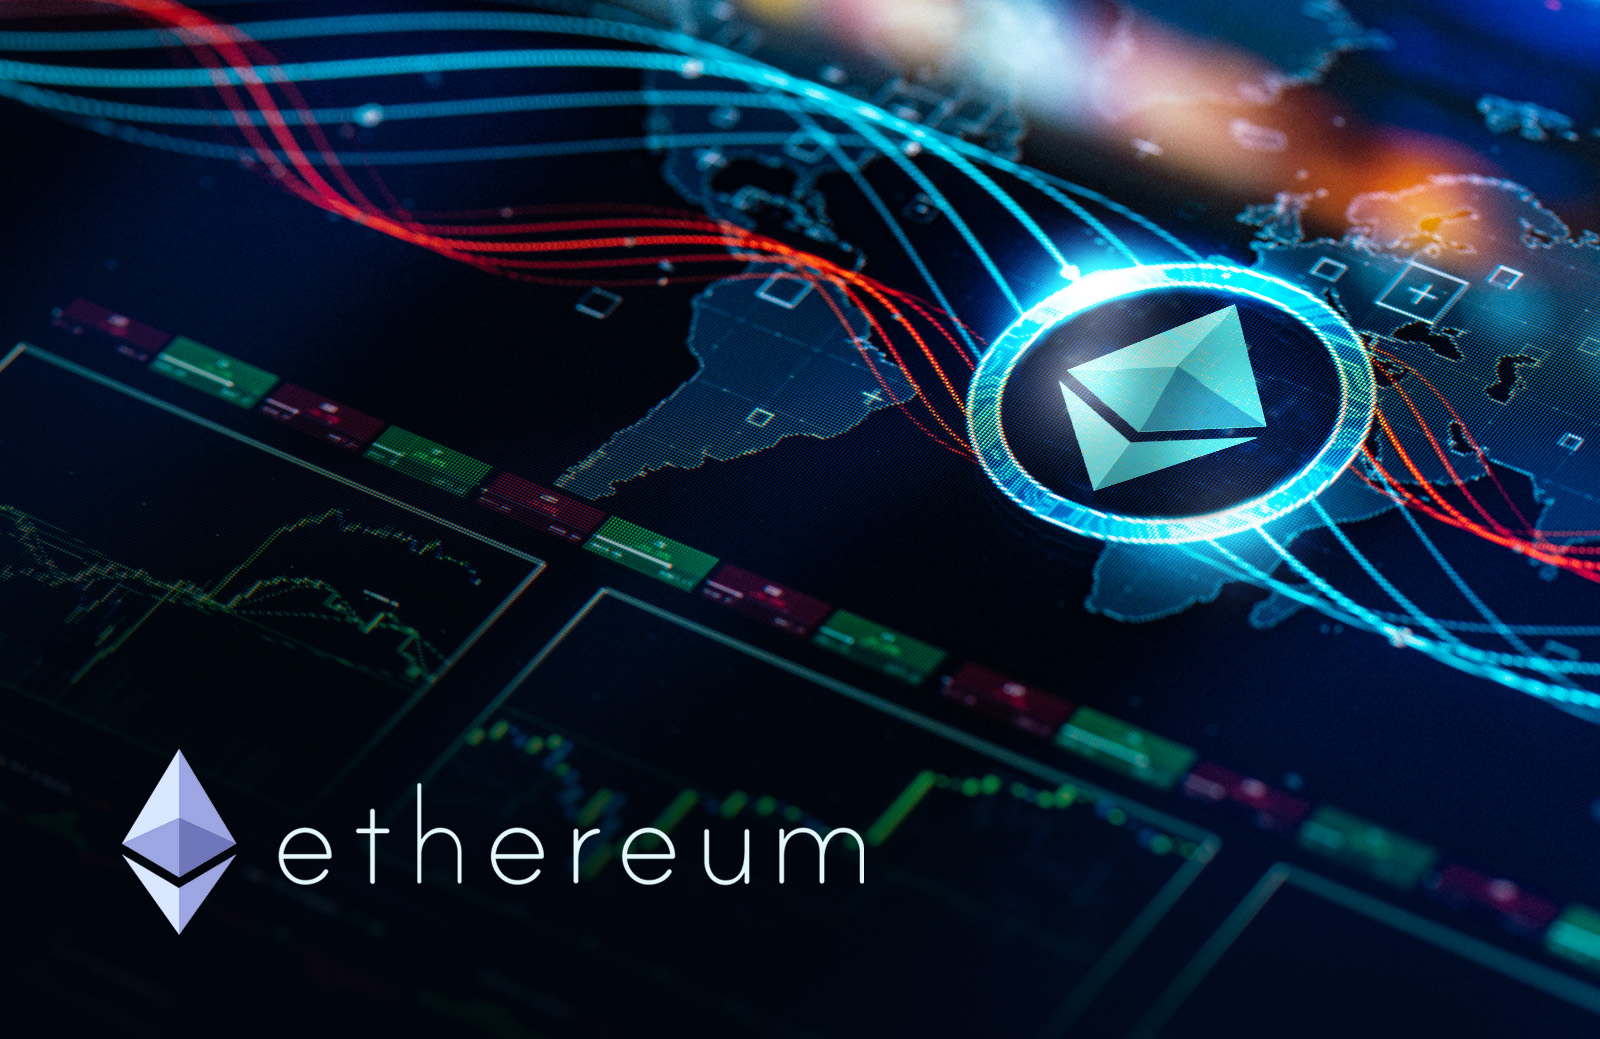 Ethereum featured image composite of logo on dynamic, computerized background